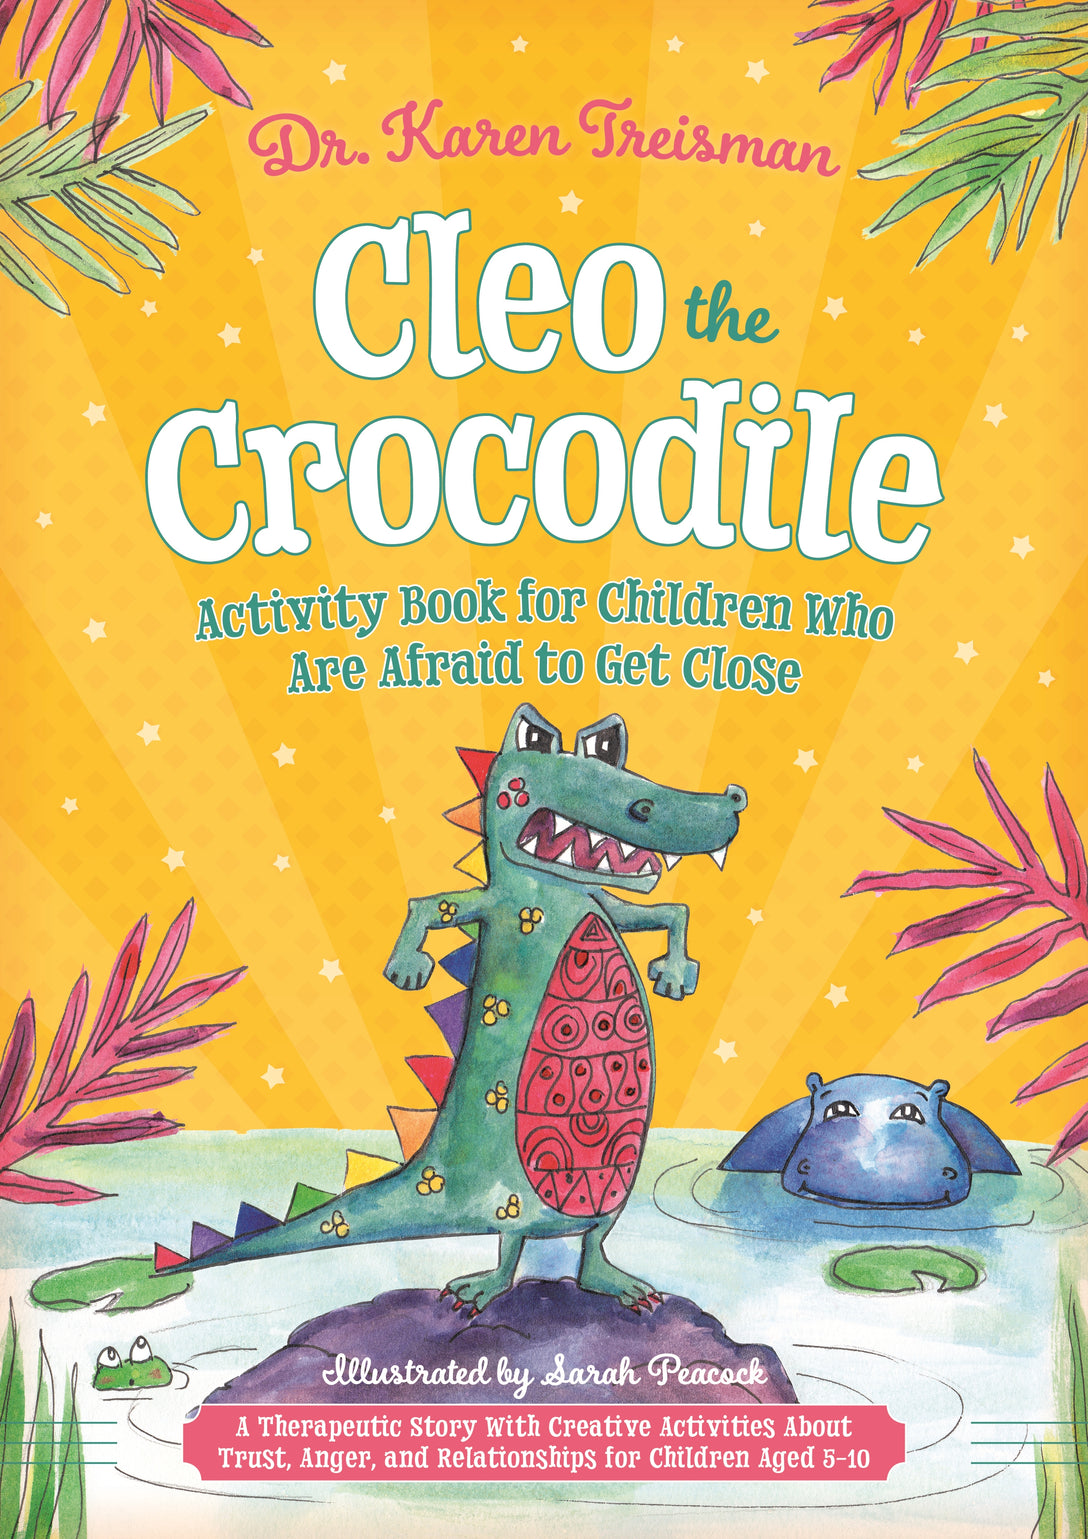 Cleo the Crocodile Activity Book for Children Who Are Afraid to Get Close by Sarah Peacock, Karen Treisman